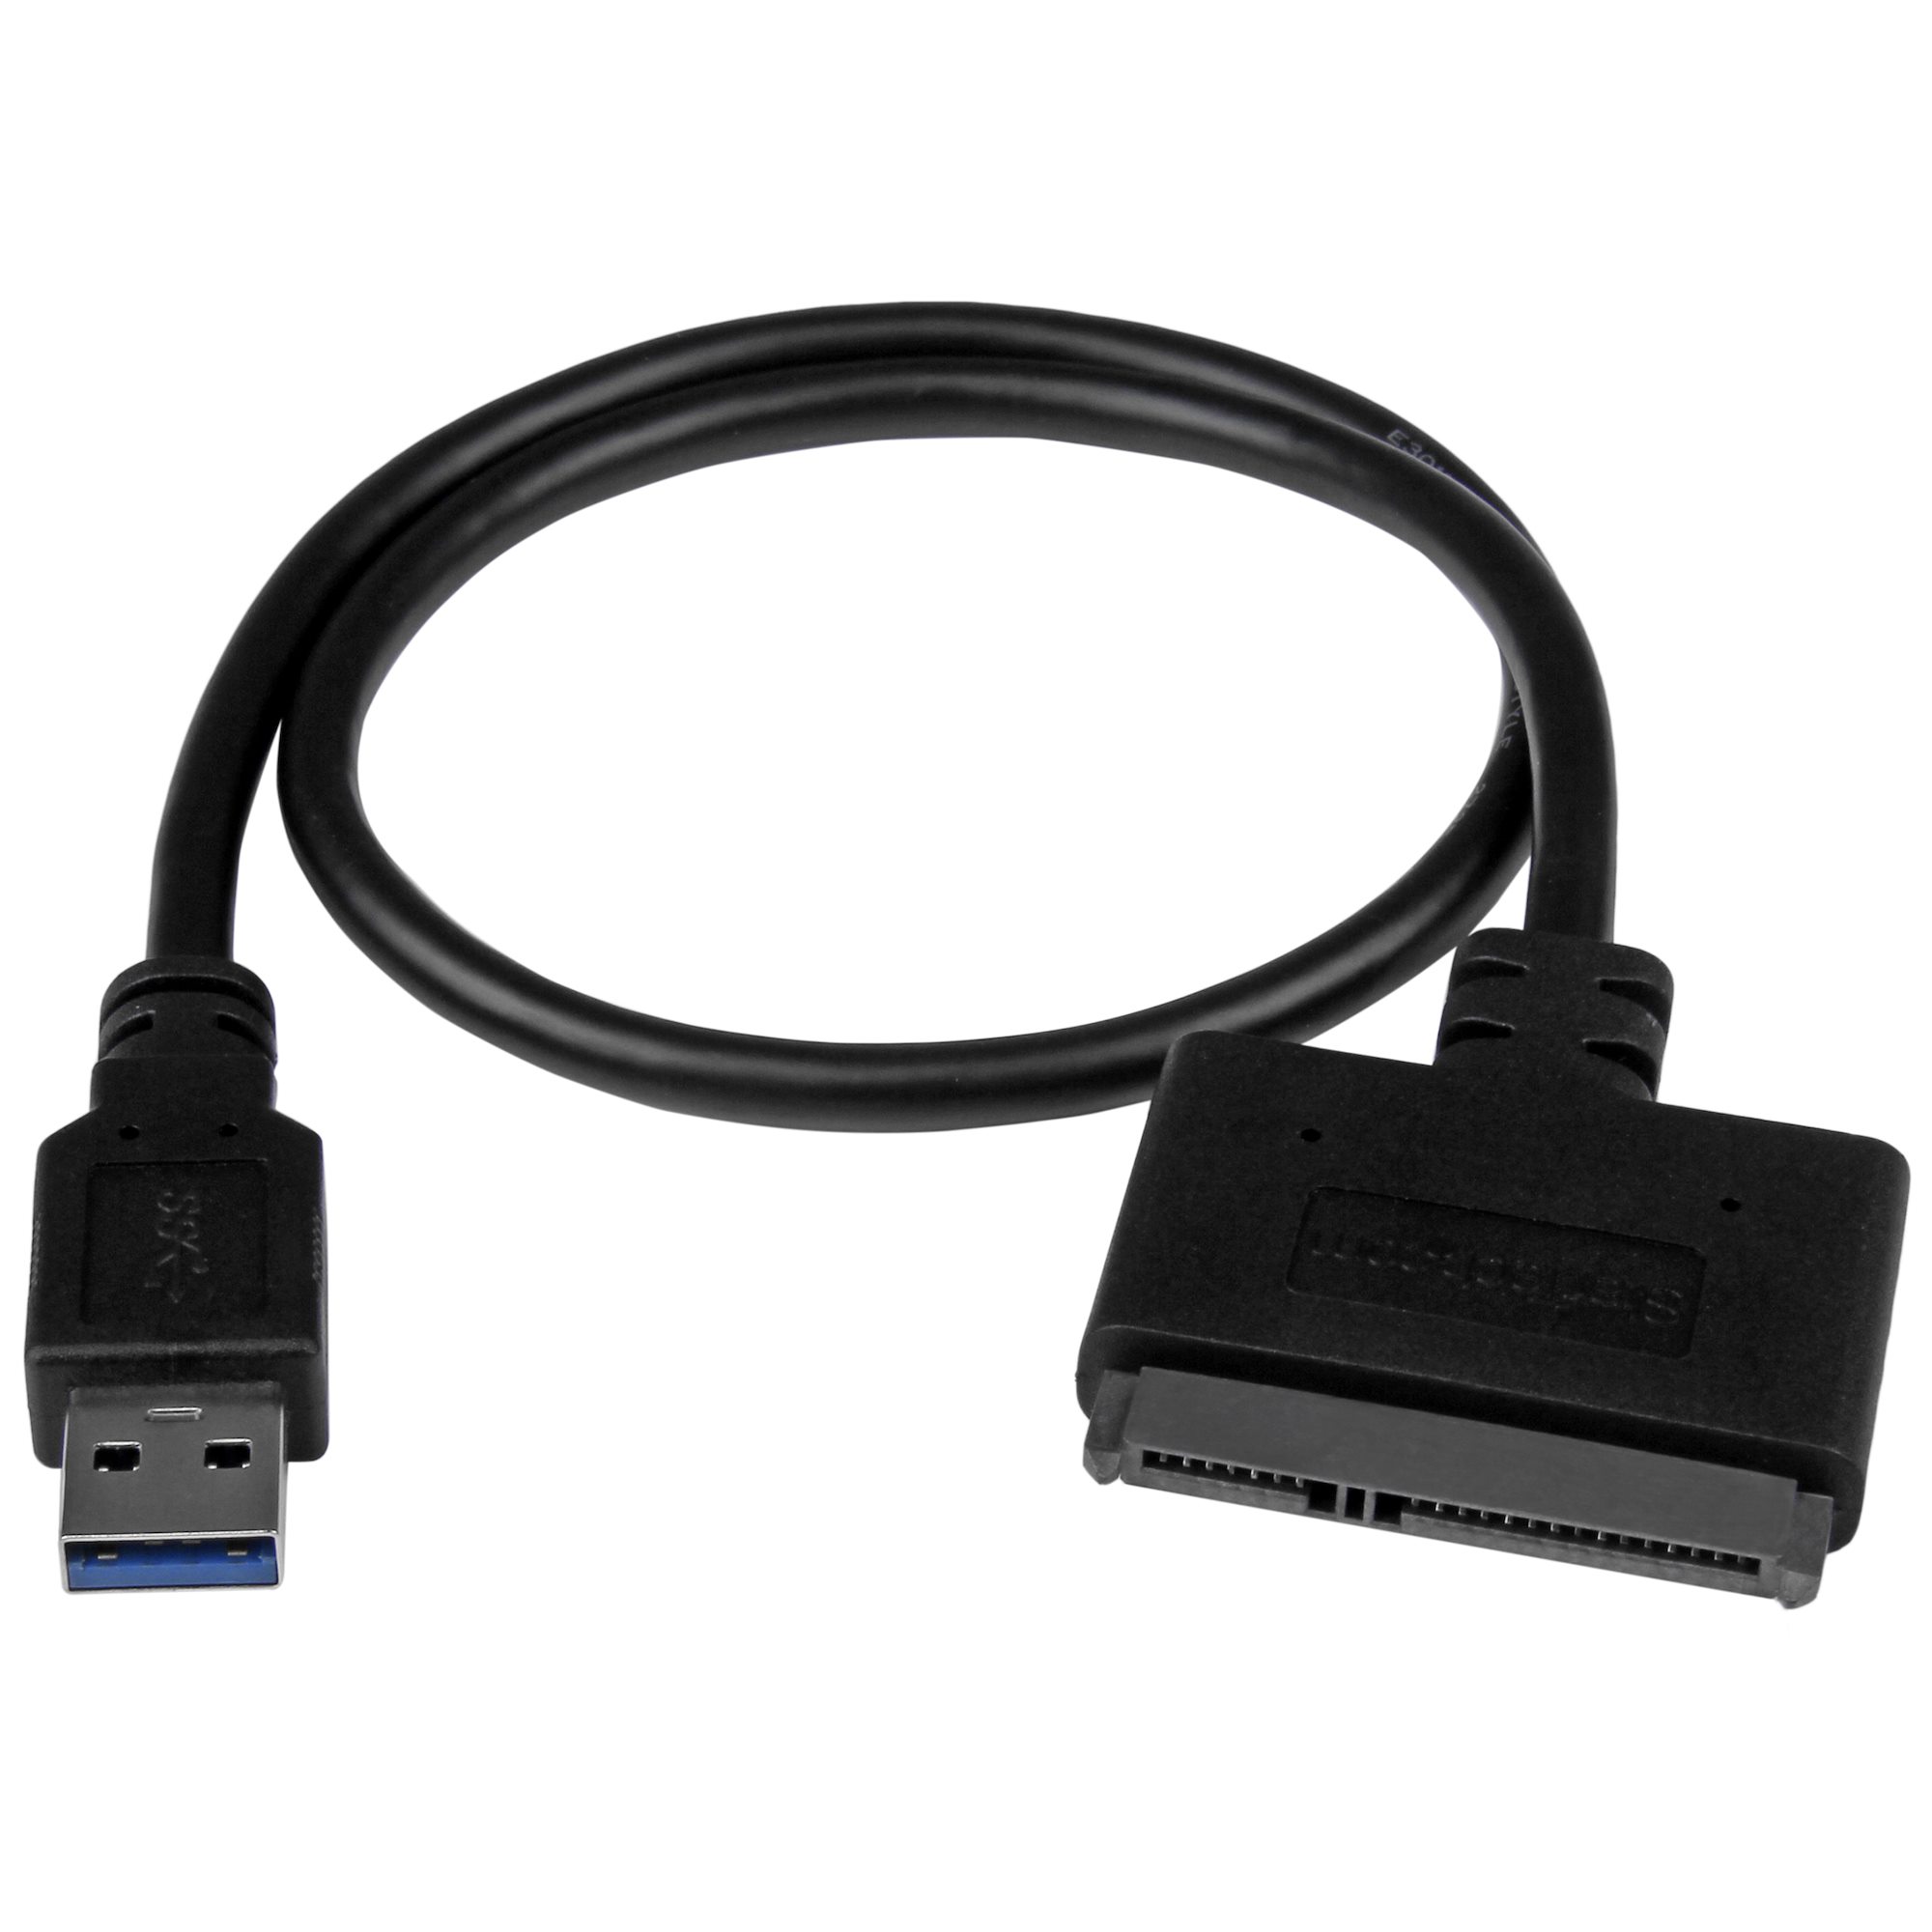 Adular perjudicar fragancia USB 3.1 (10Gbps) Adapter Cable - Drive Adapters and Drive Converters |  StarTech.com